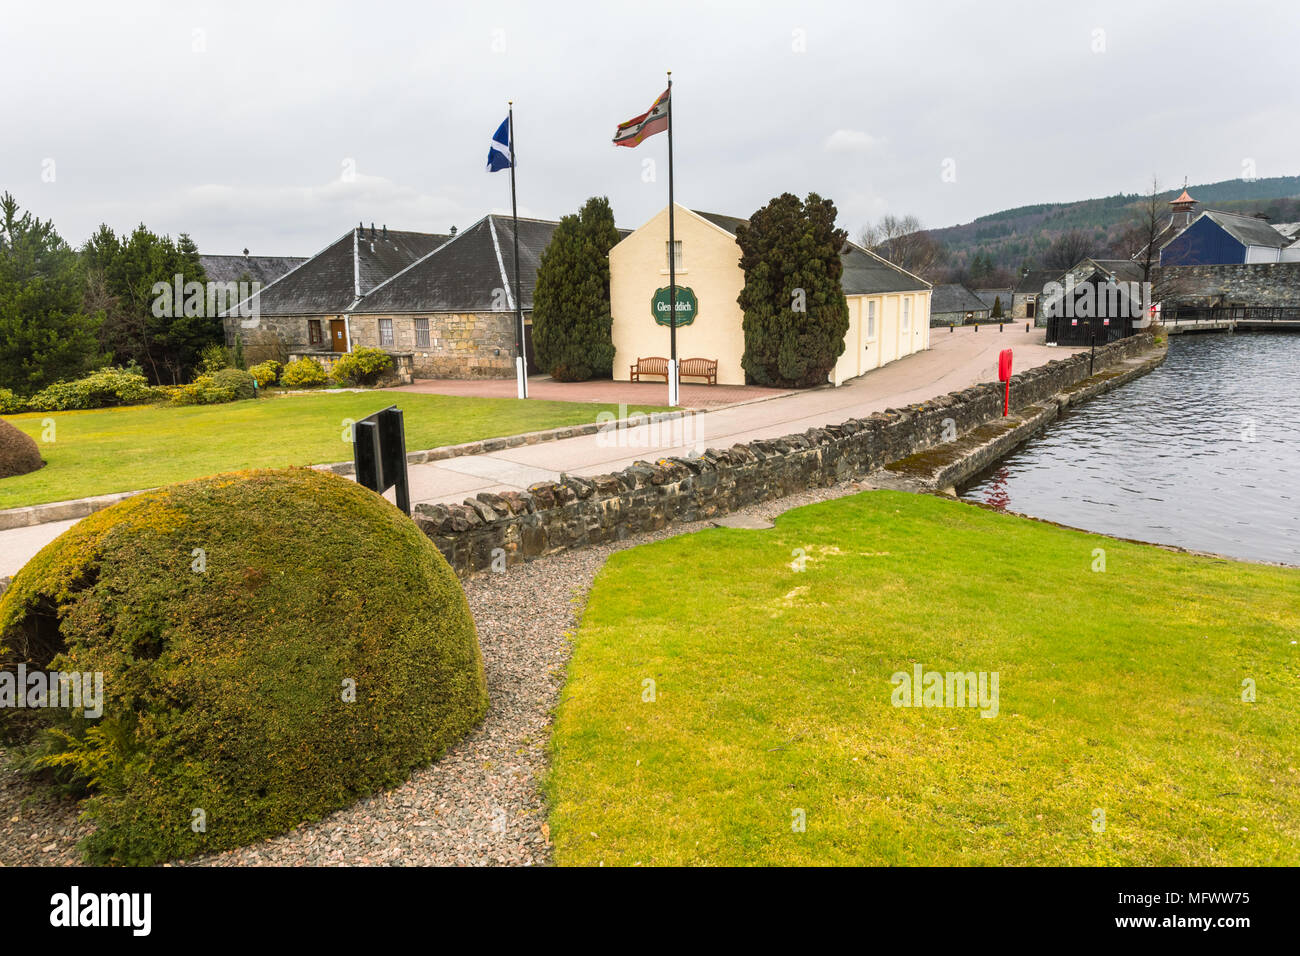 View of the grounds at the Glenfiddich whisky distillery, Scotland UK Stock Photo